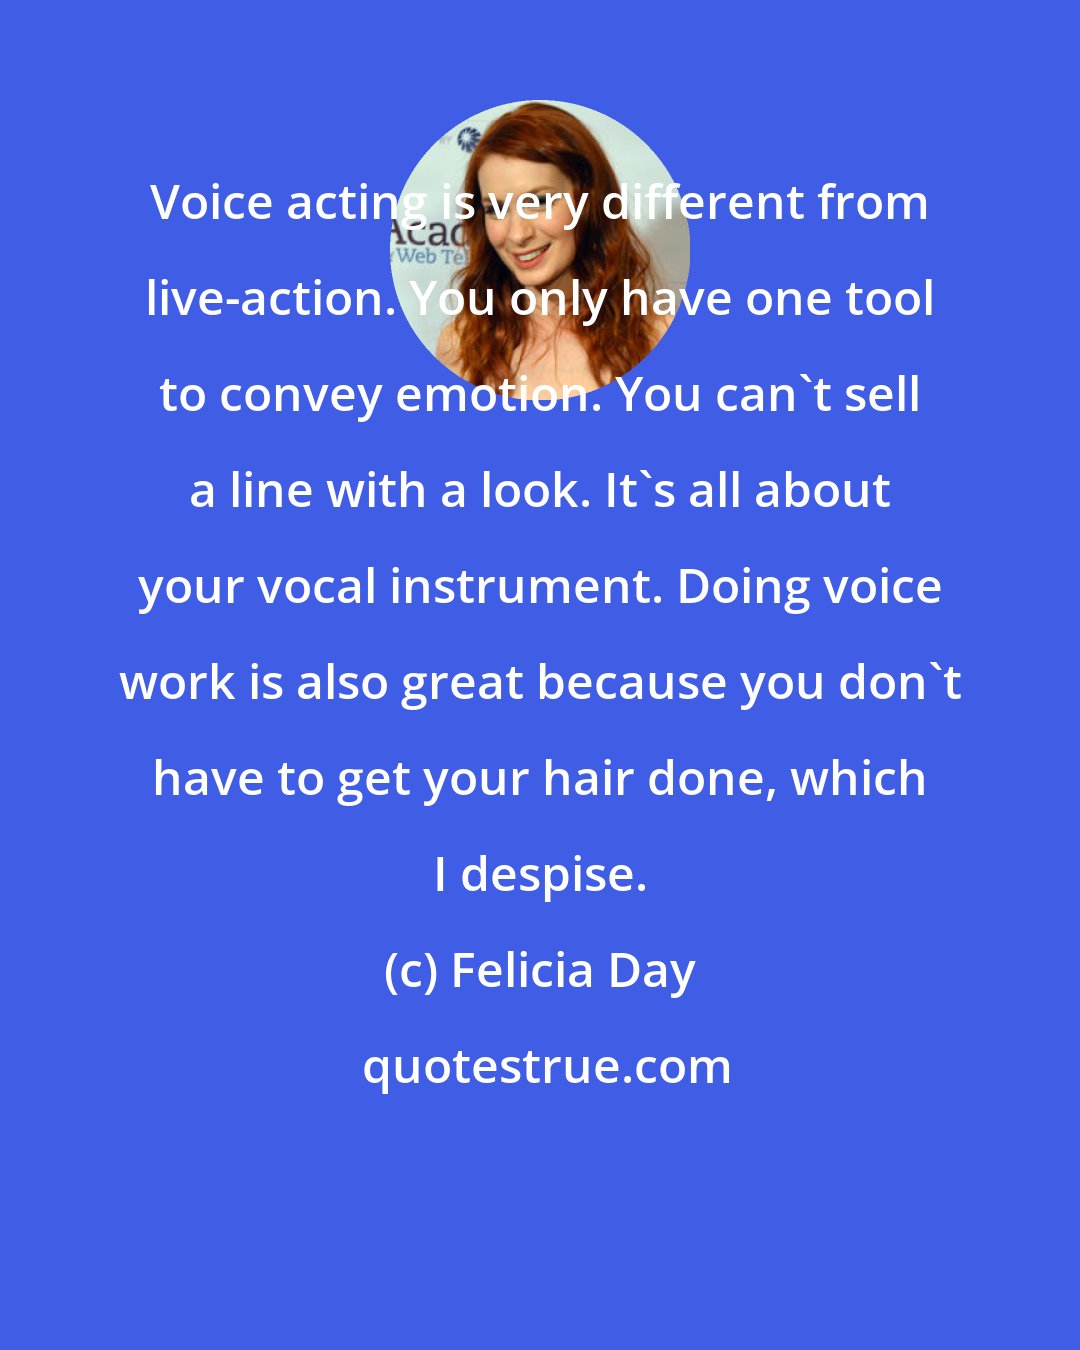 Felicia Day: Voice acting is very different from live-action. You only have one tool to convey emotion. You can't sell a line with a look. It's all about your vocal instrument. Doing voice work is also great because you don't have to get your hair done, which I despise.